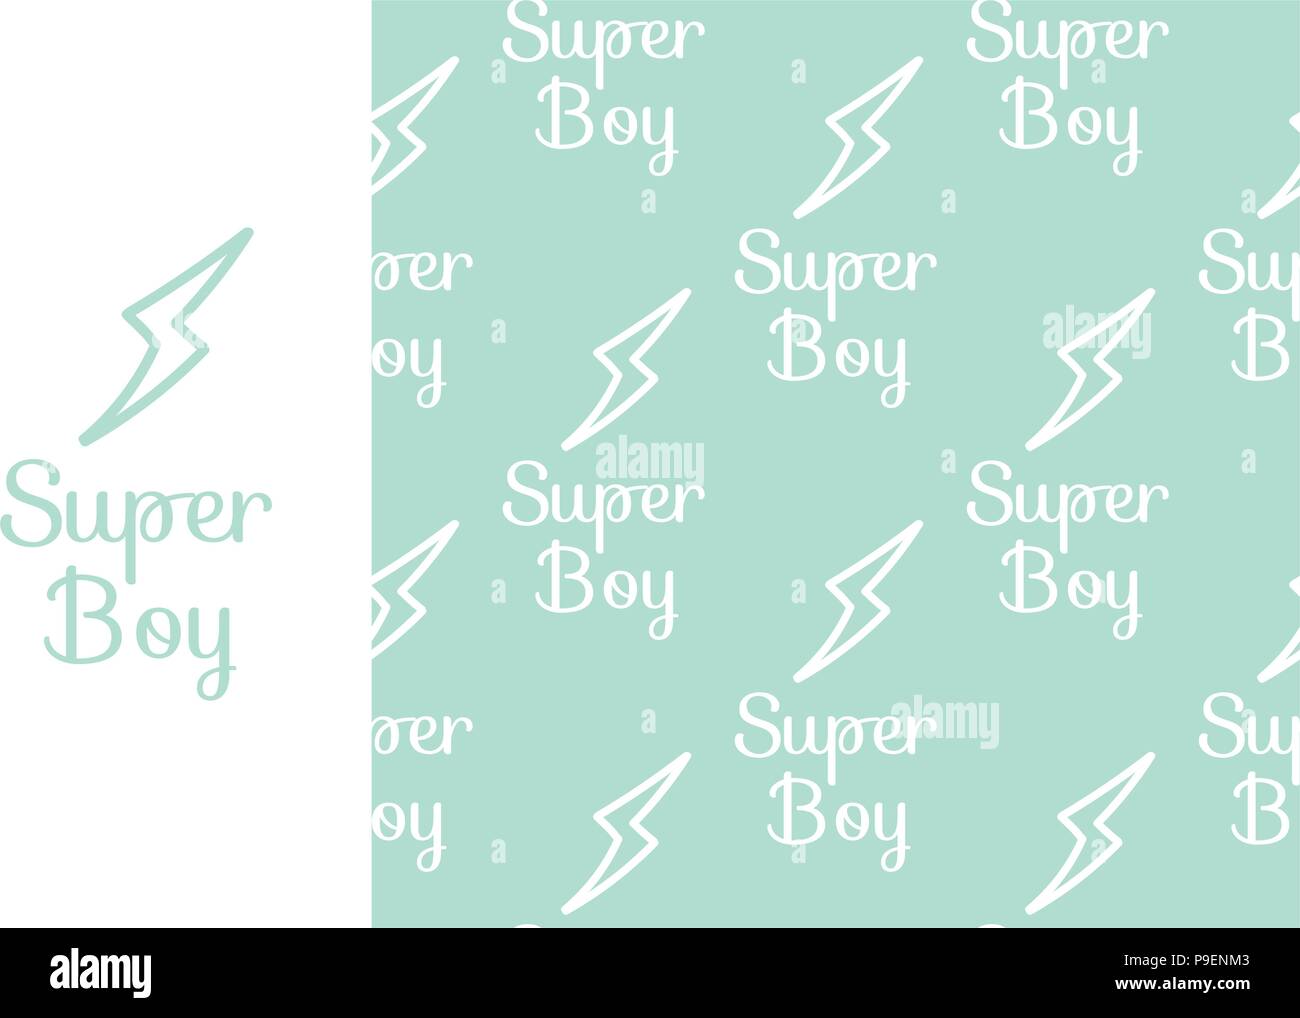 Vector Super Boy. Seamless repeating pattern isolated on pink background. Stock Vector